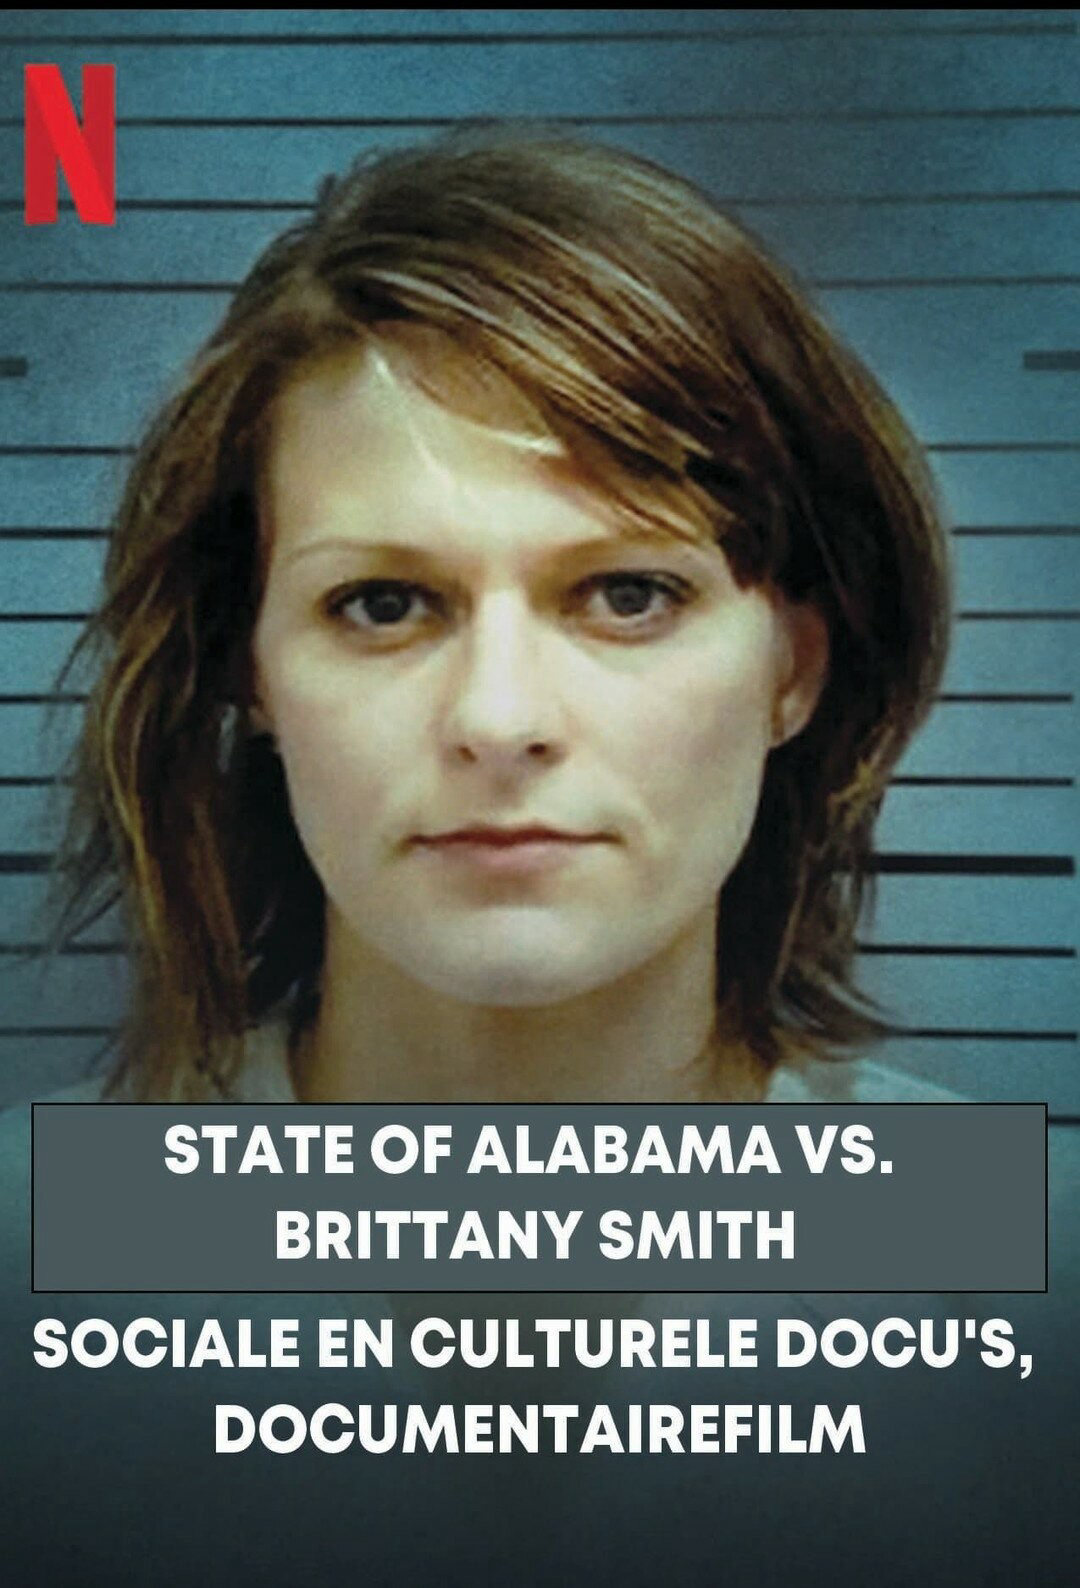 Xem Phim Cuộc chiến giữa bang Alabama và Brittany Smith (State of Alabama vs. Brittany Smith)